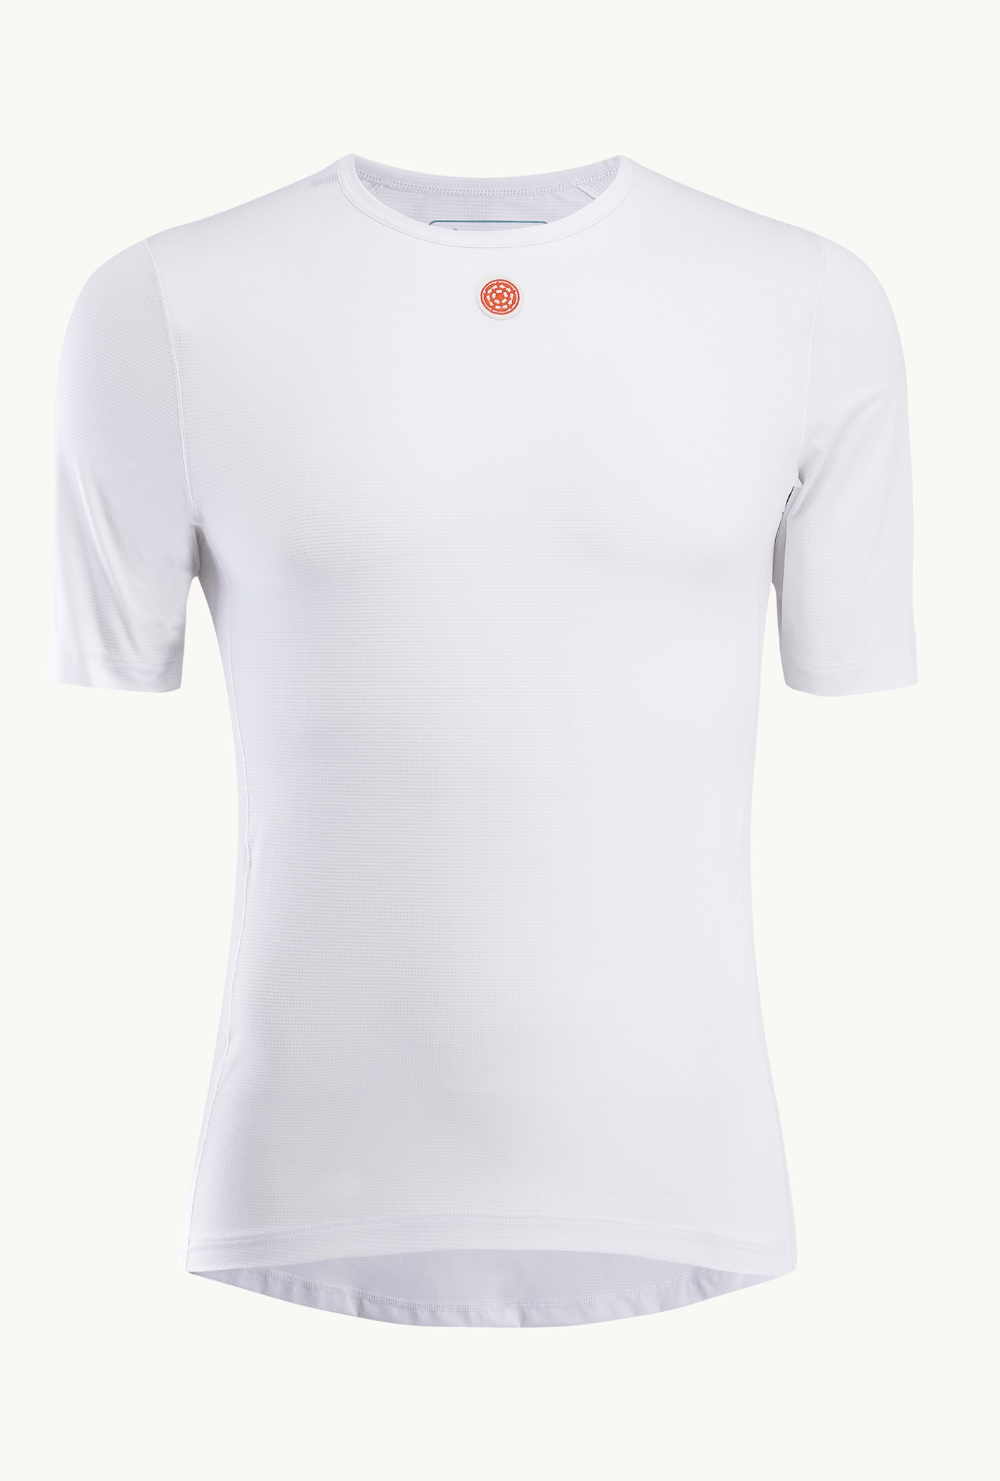 Pearson 1860  Touch Base - Short Sleeve Base Layer White  X-large / White